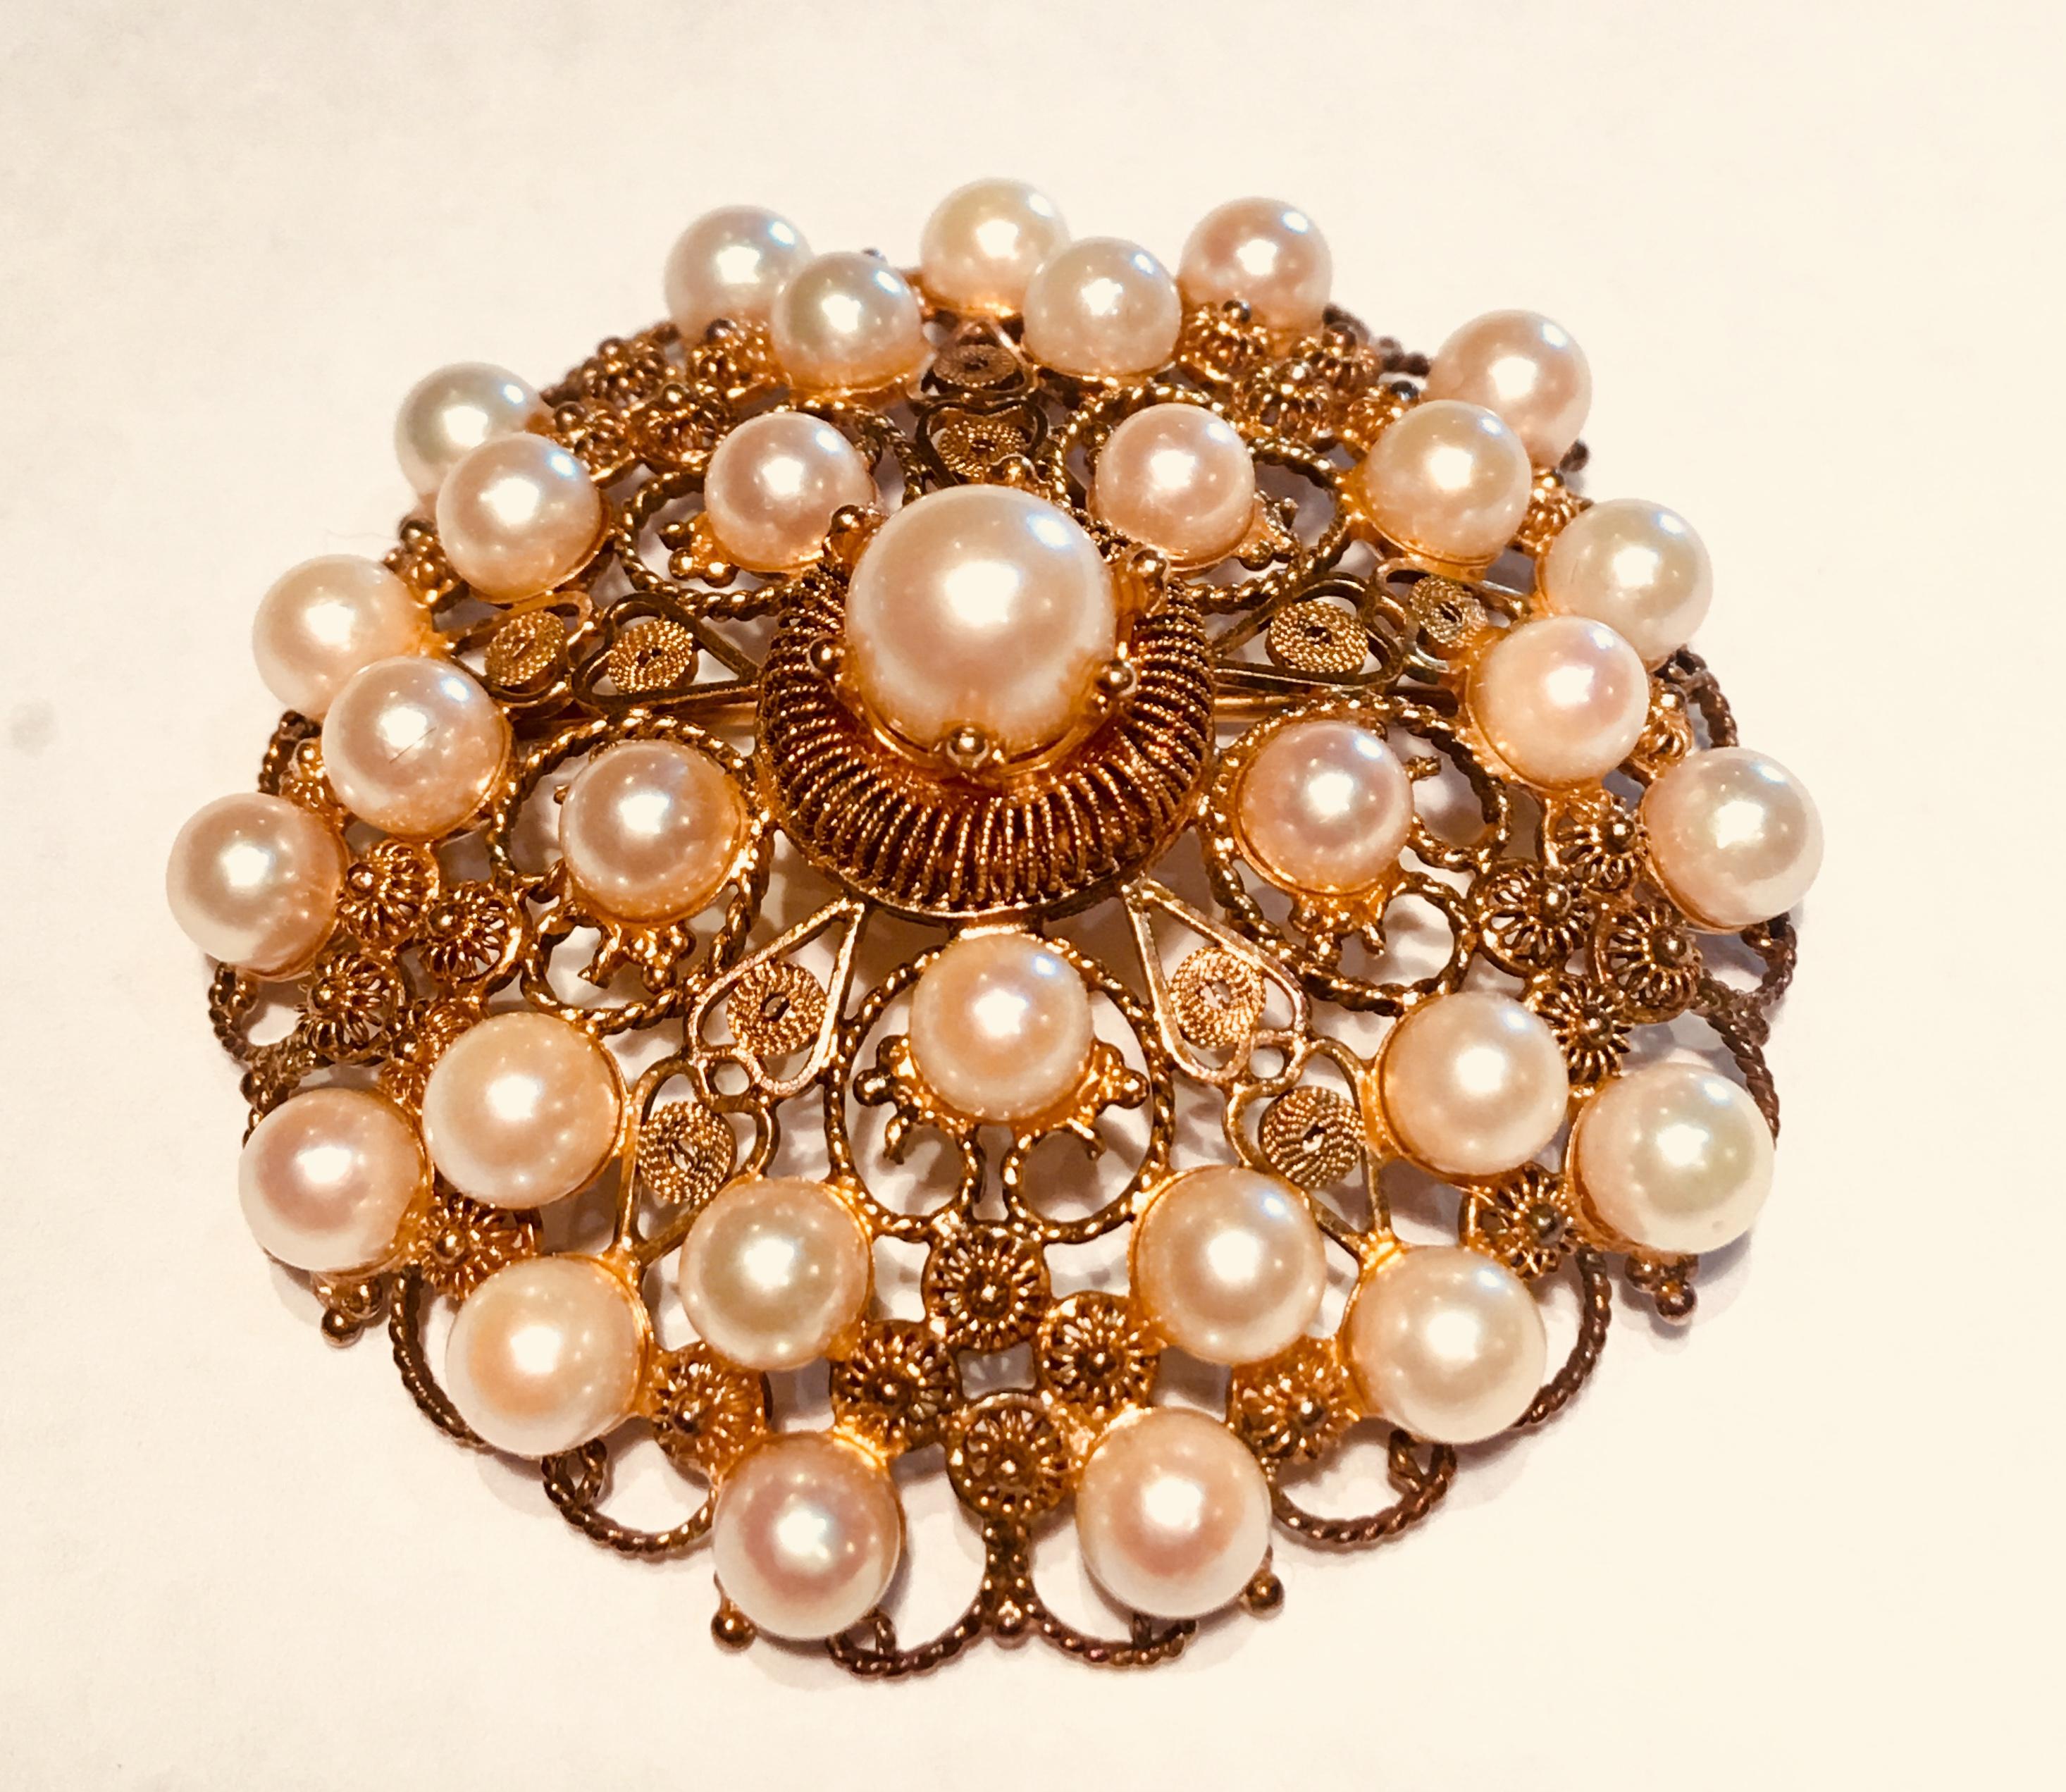 Lovely antique, late Victorian, handmade 14 karat gold filigree brooch pin pendant from the late 1800s is large, round and convex shaped, featuring 31 round, lustrous golden hued saltwater pearls and a generous sized, hinged bale to wear it on a